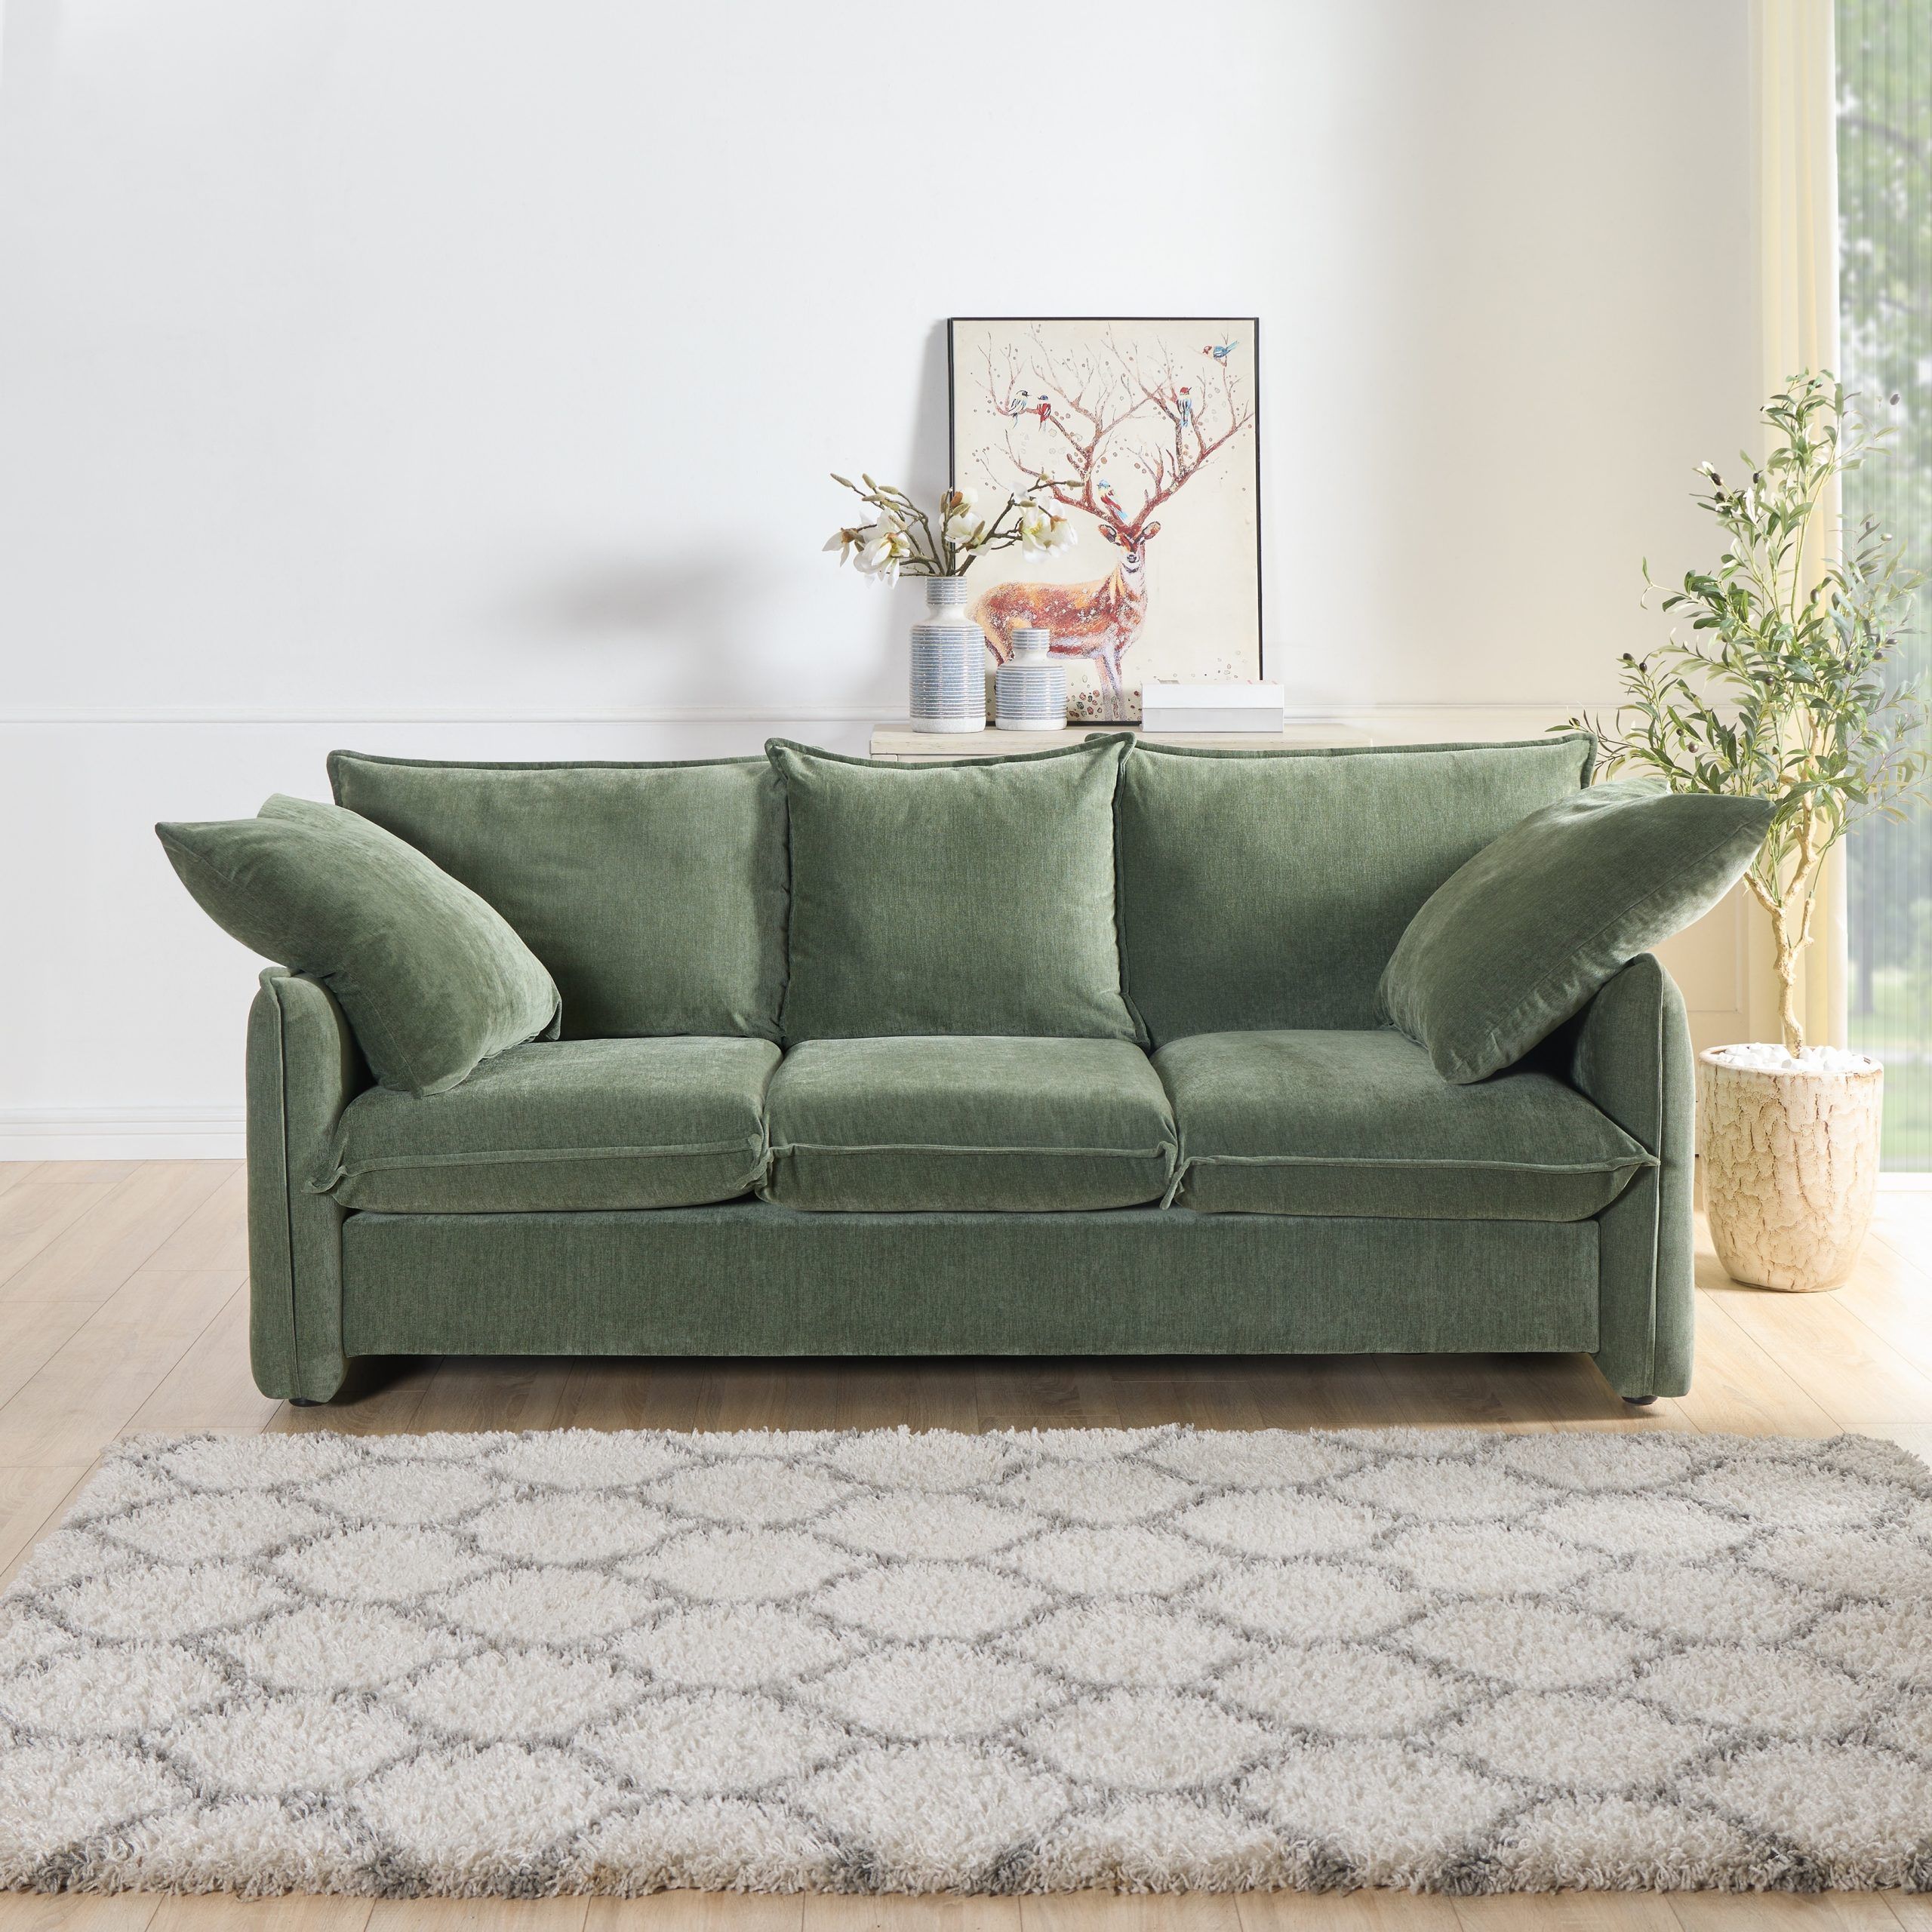 Comfy 3 Seater Sofa Classic 3 Seater Sofa – On Sale – Bed Bath & Beyond –  38449343 Intended For Traditional 3 Seater Sofas (View 11 of 15)